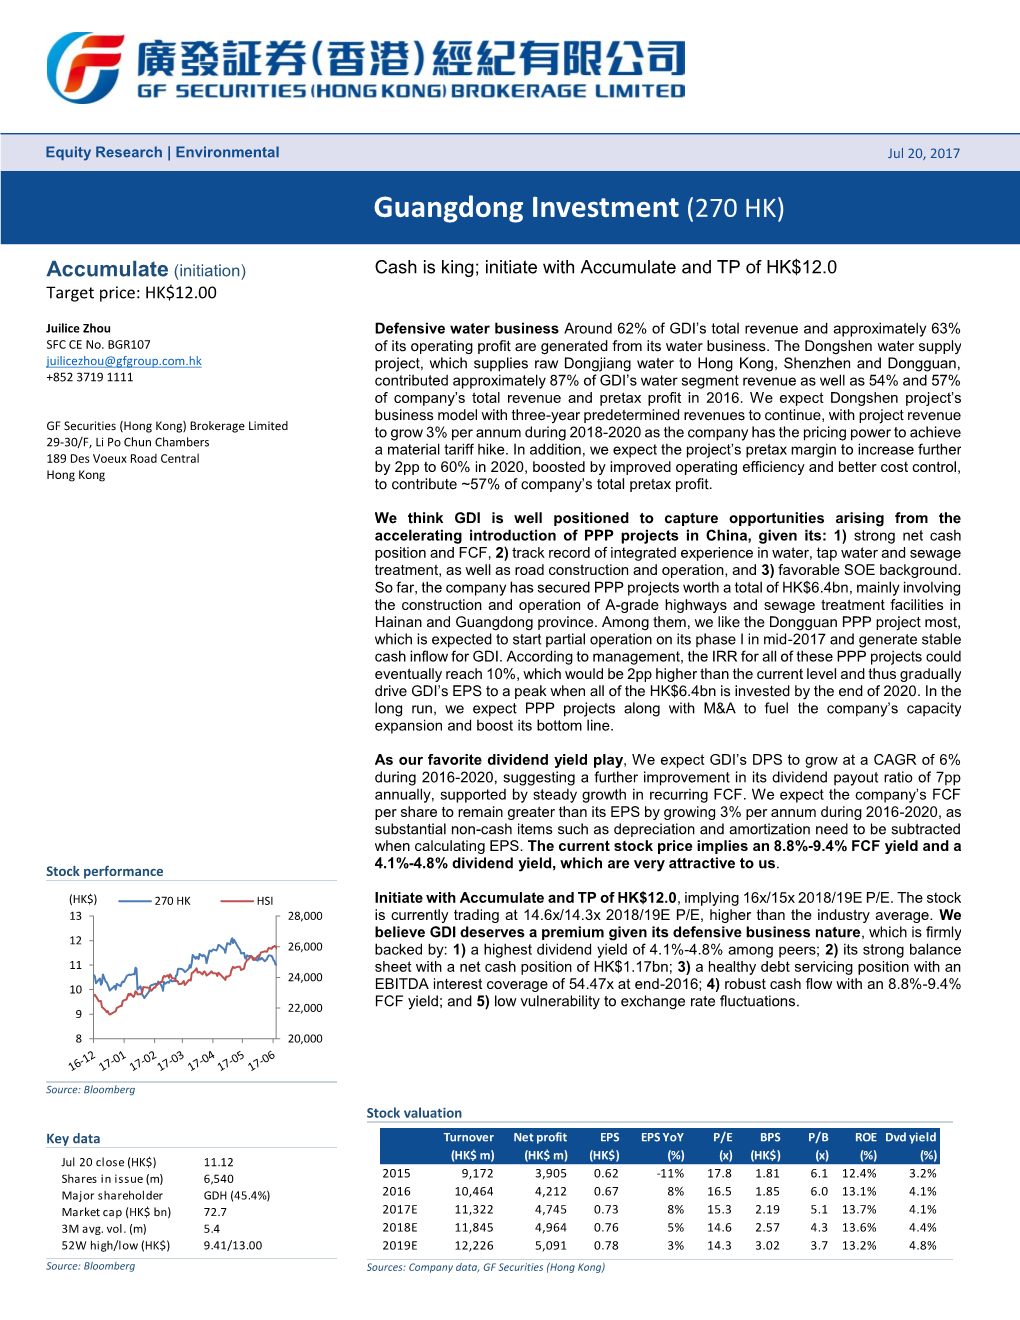 Guangdong Investment (270 HK)